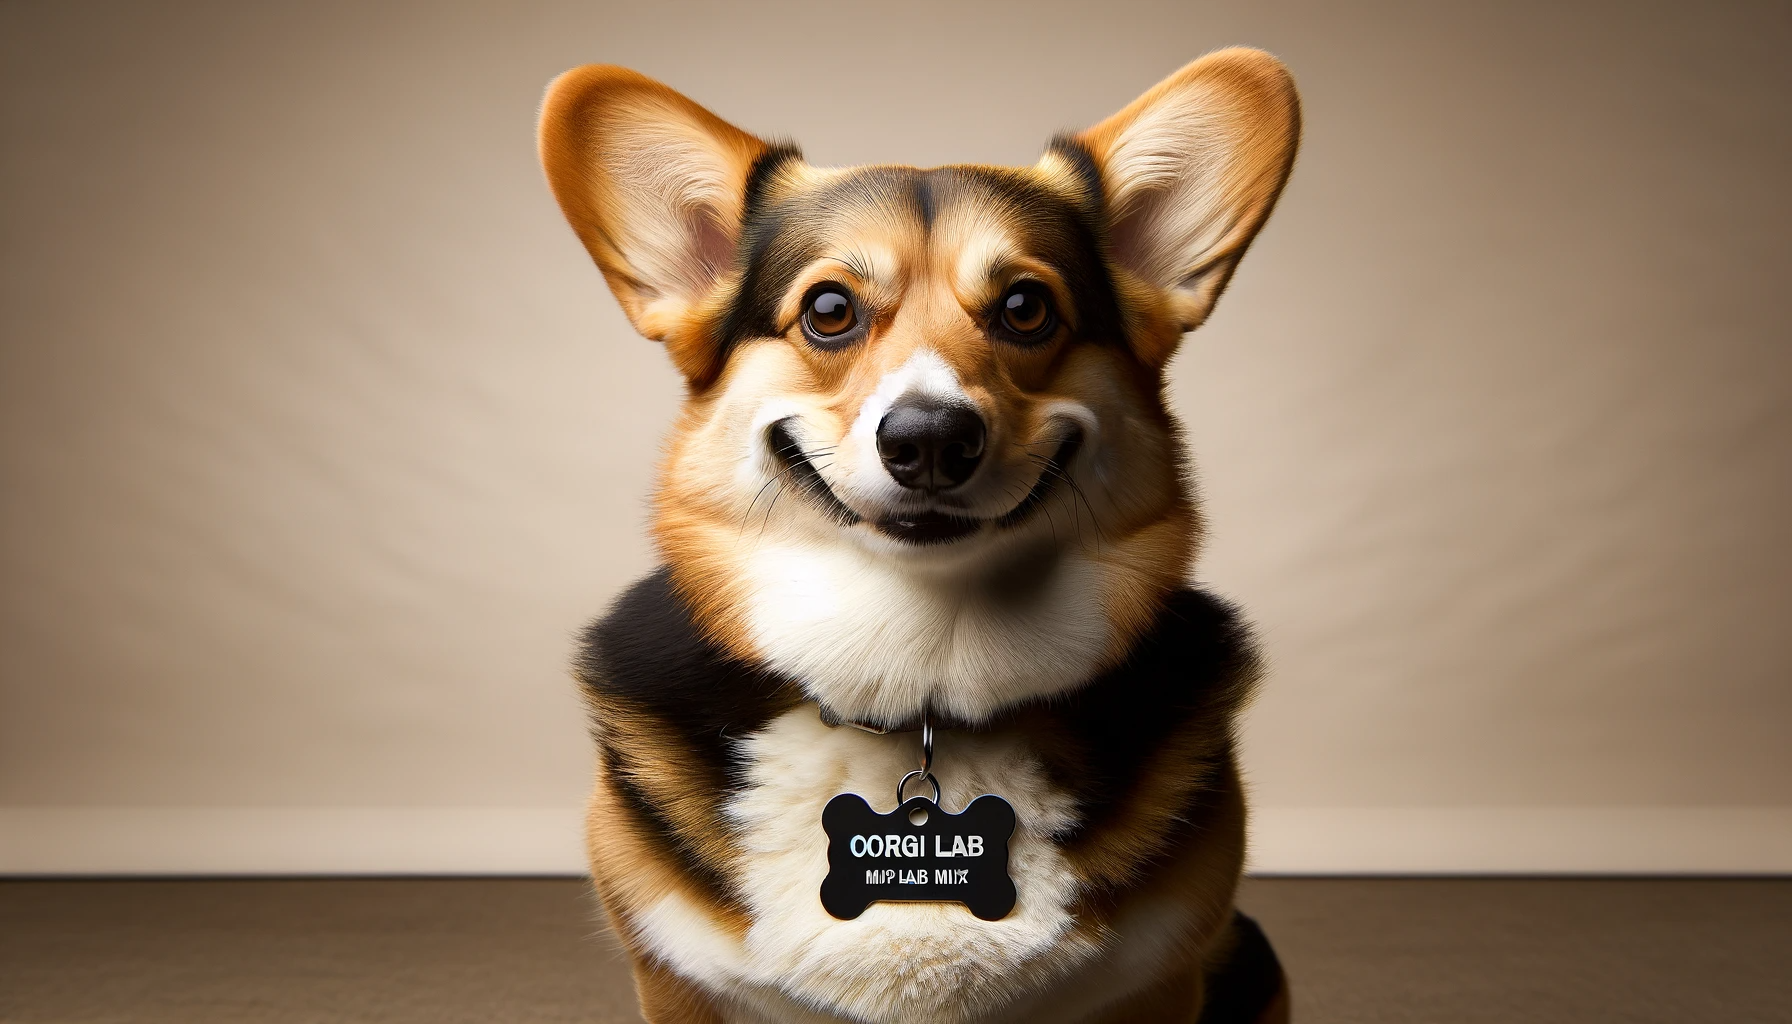 A Corgidor with a cheeky grin, wearing a name tag that proudly says 'Corgi Lab Mix'